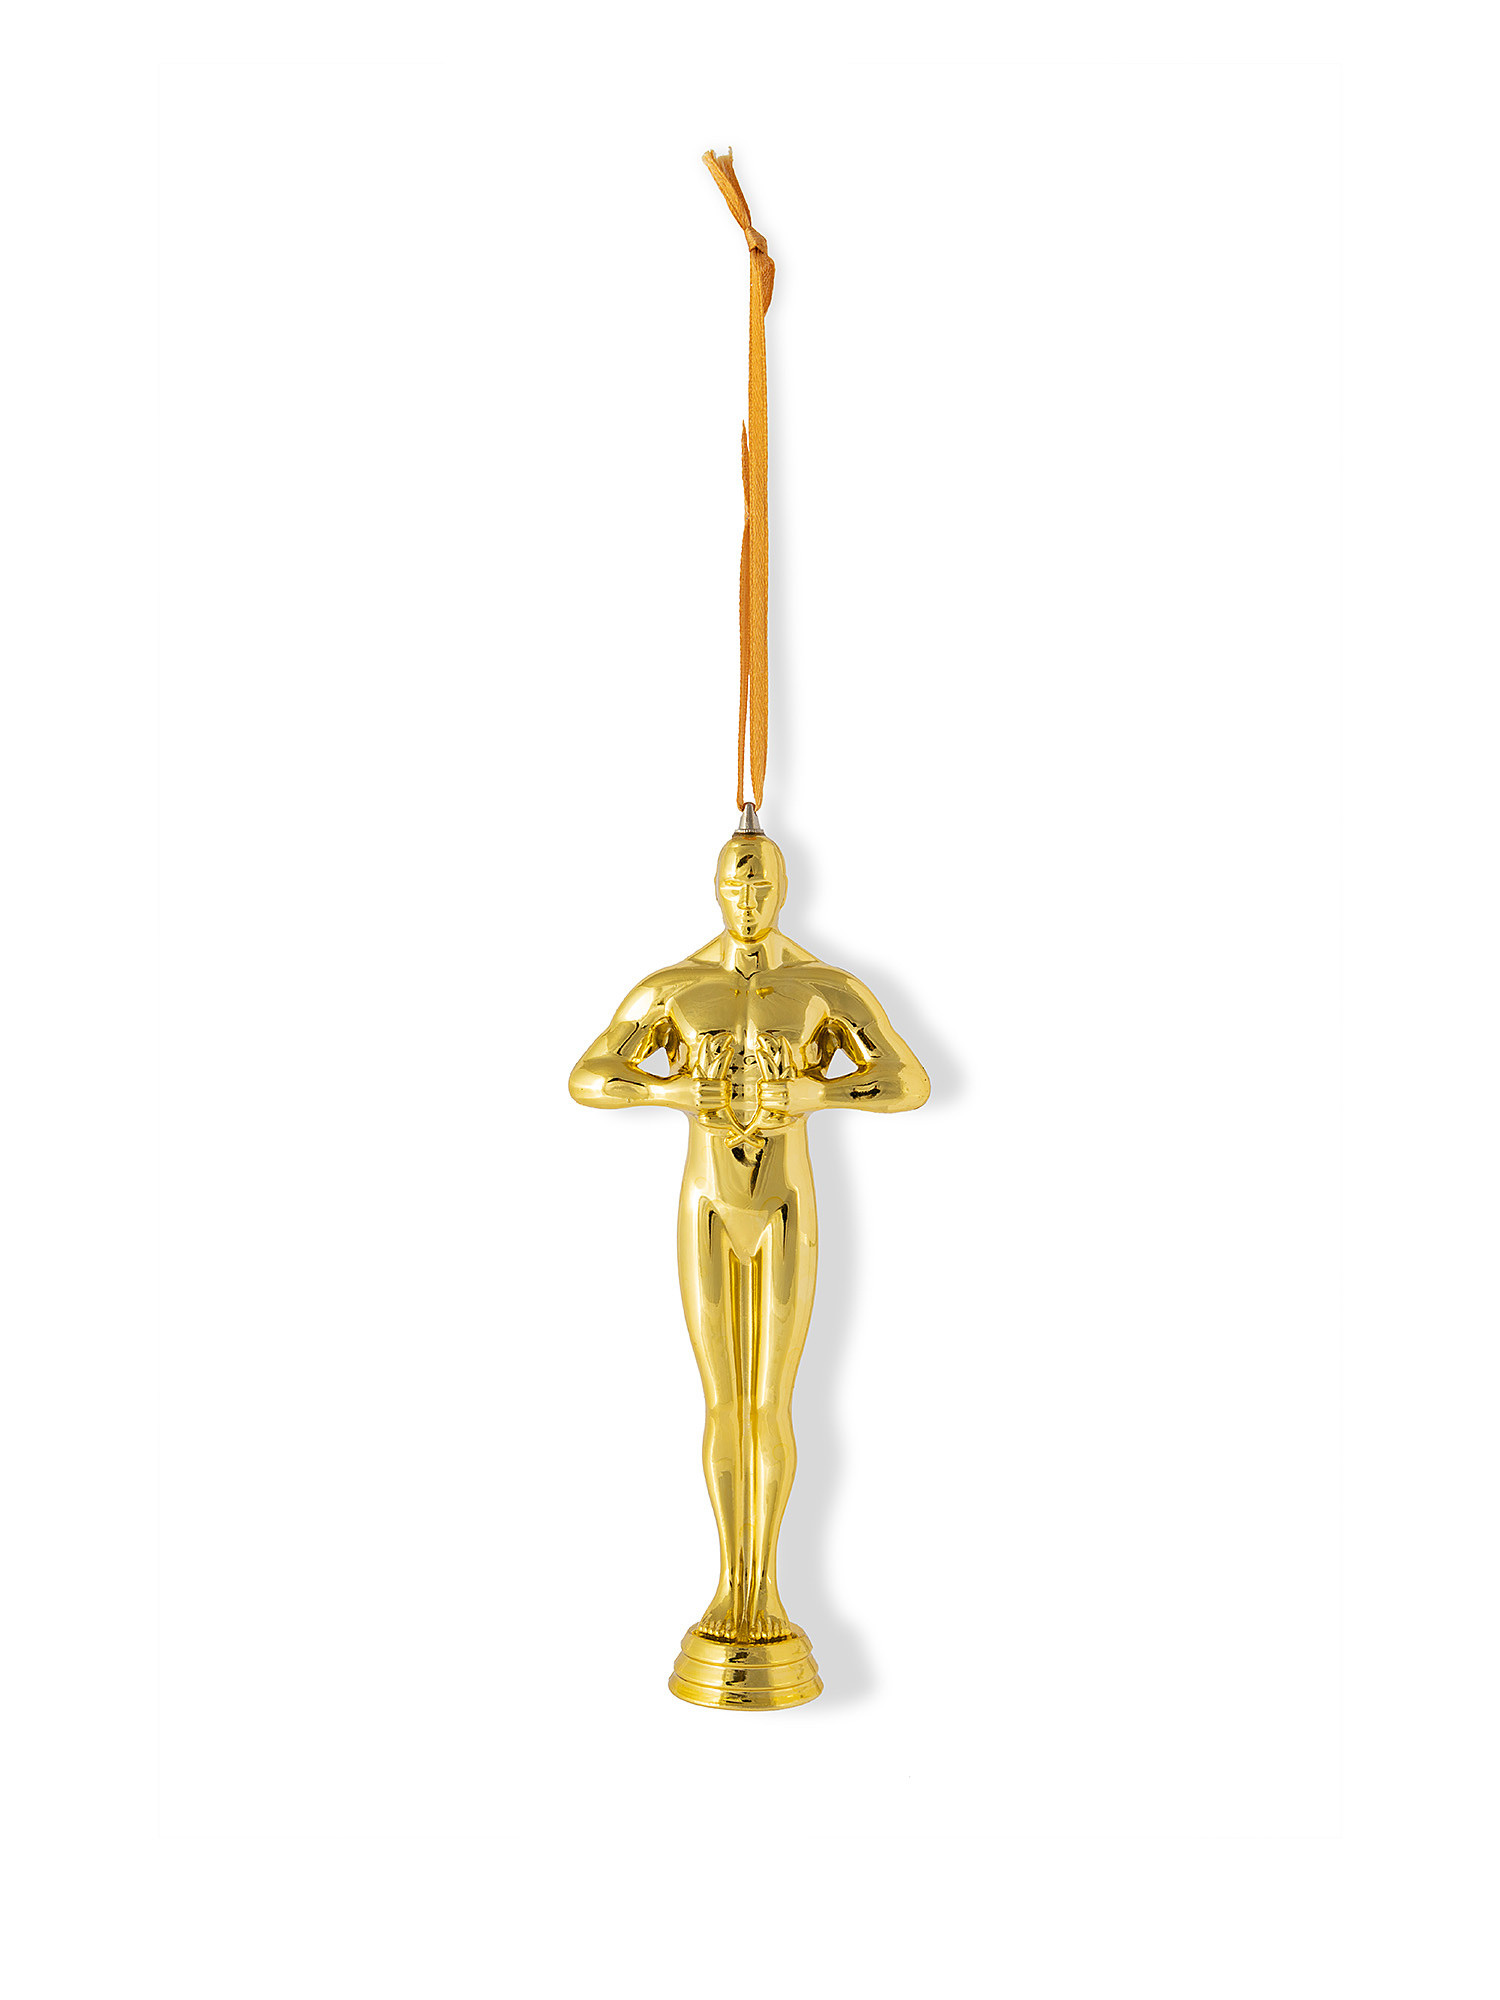 Oscar statuette tree decoration in hand-decorated glass 